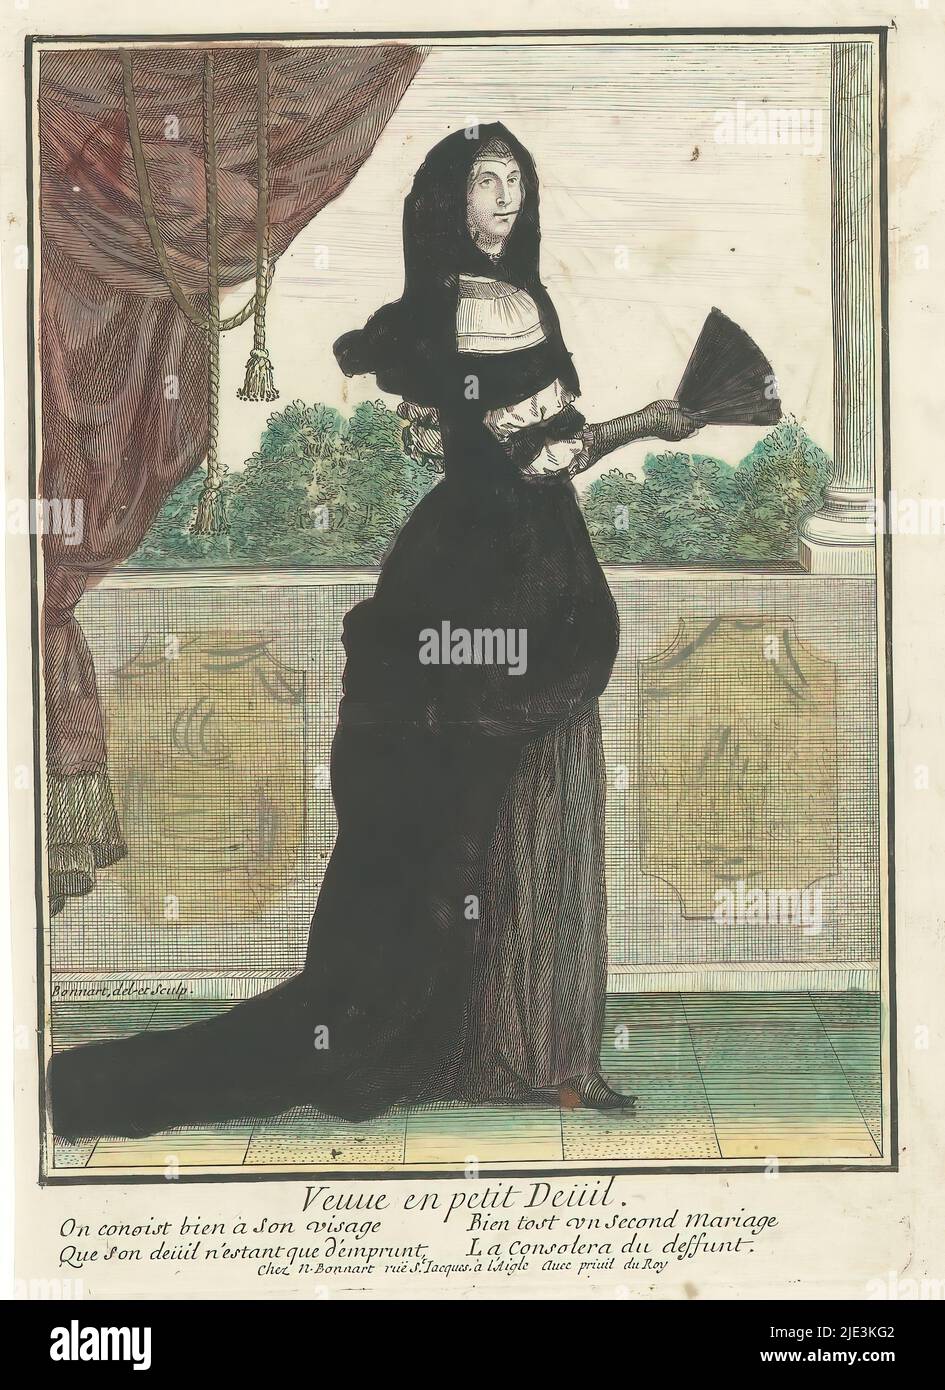 Veuve en petit Deuil (title on object), Widow in light mourning, Lady to right, dressed in black over garment with black veil over head. Fan in right hand., print maker: Nicolas Bonnart, (mentioned on object), after drawing by: Nicolas Bonnart, (mentioned on object), publisher: Nicolas Bonnart, (mentioned on object), Paris, c. 1676, paper, etching, height 300 mm × width 200 mm Stock Photo